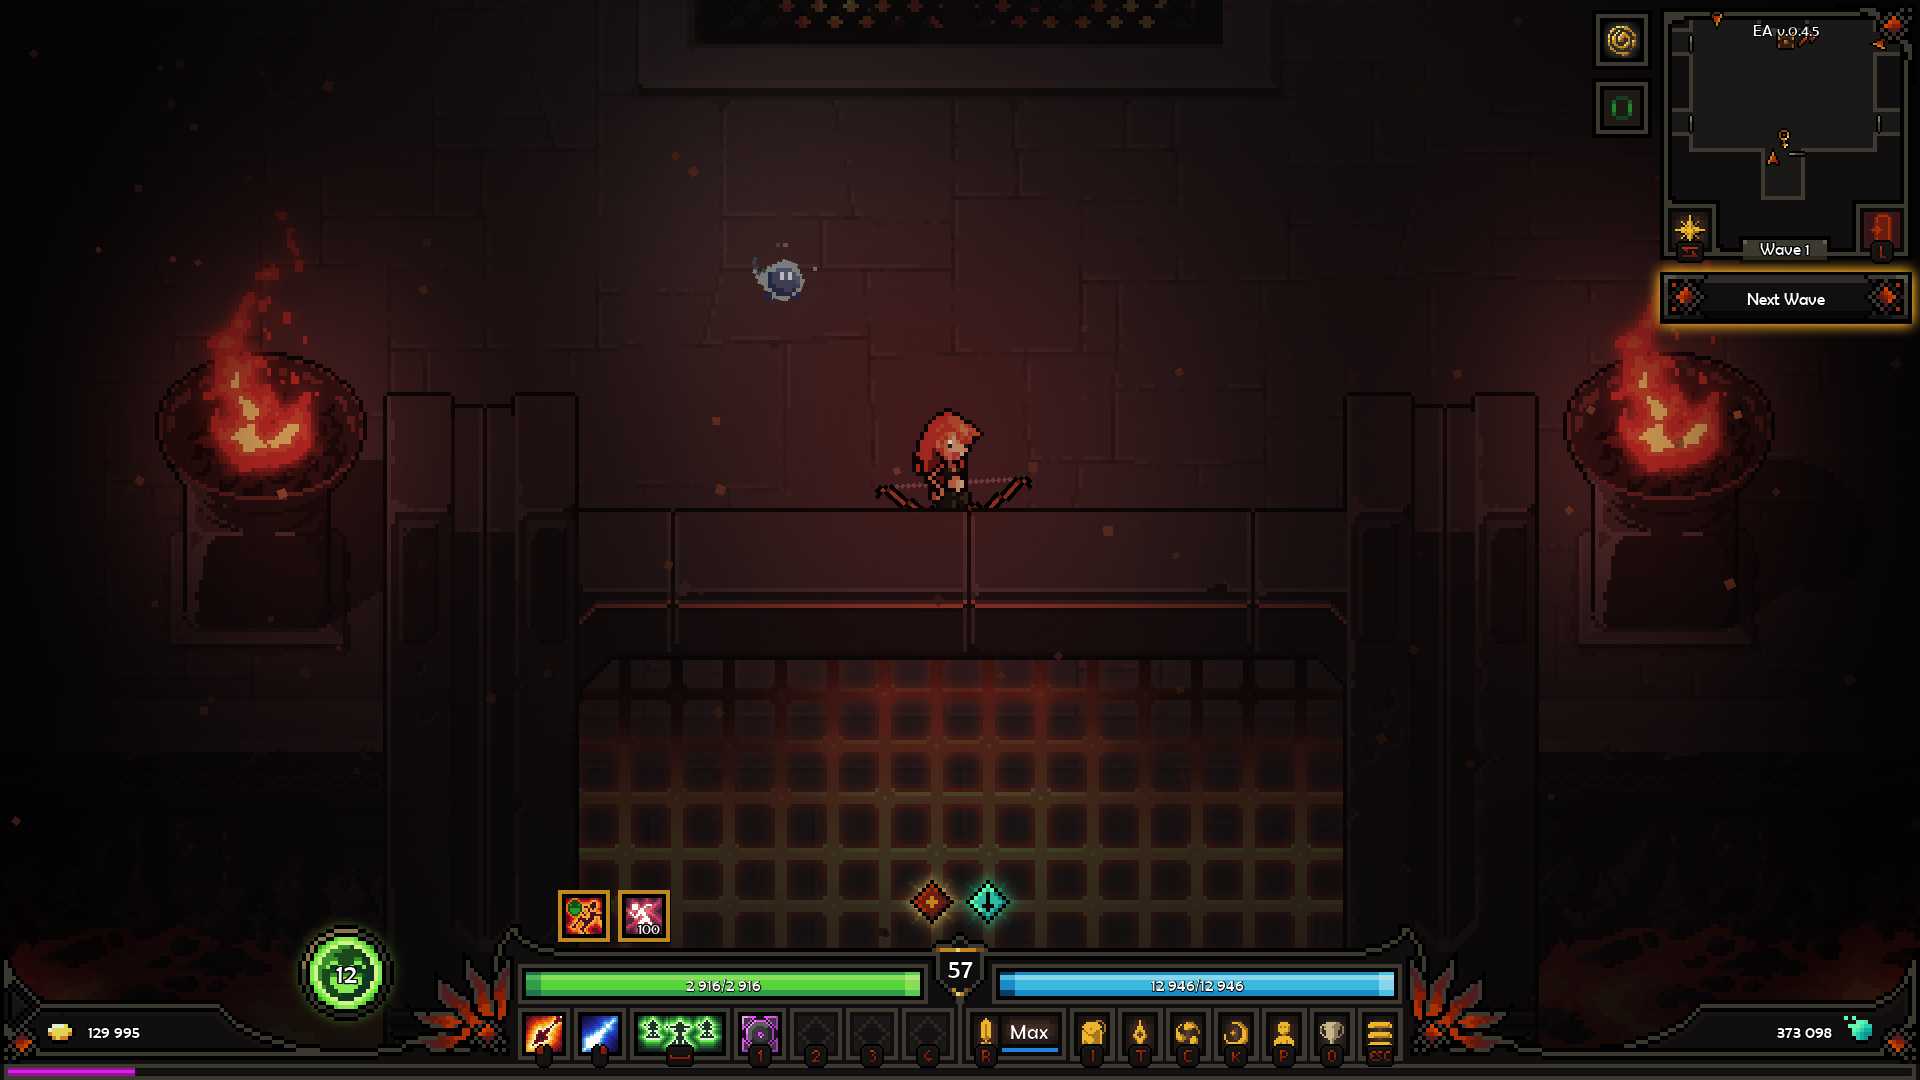 And i thought gold chest cannot spawn in the temple. (not mimic